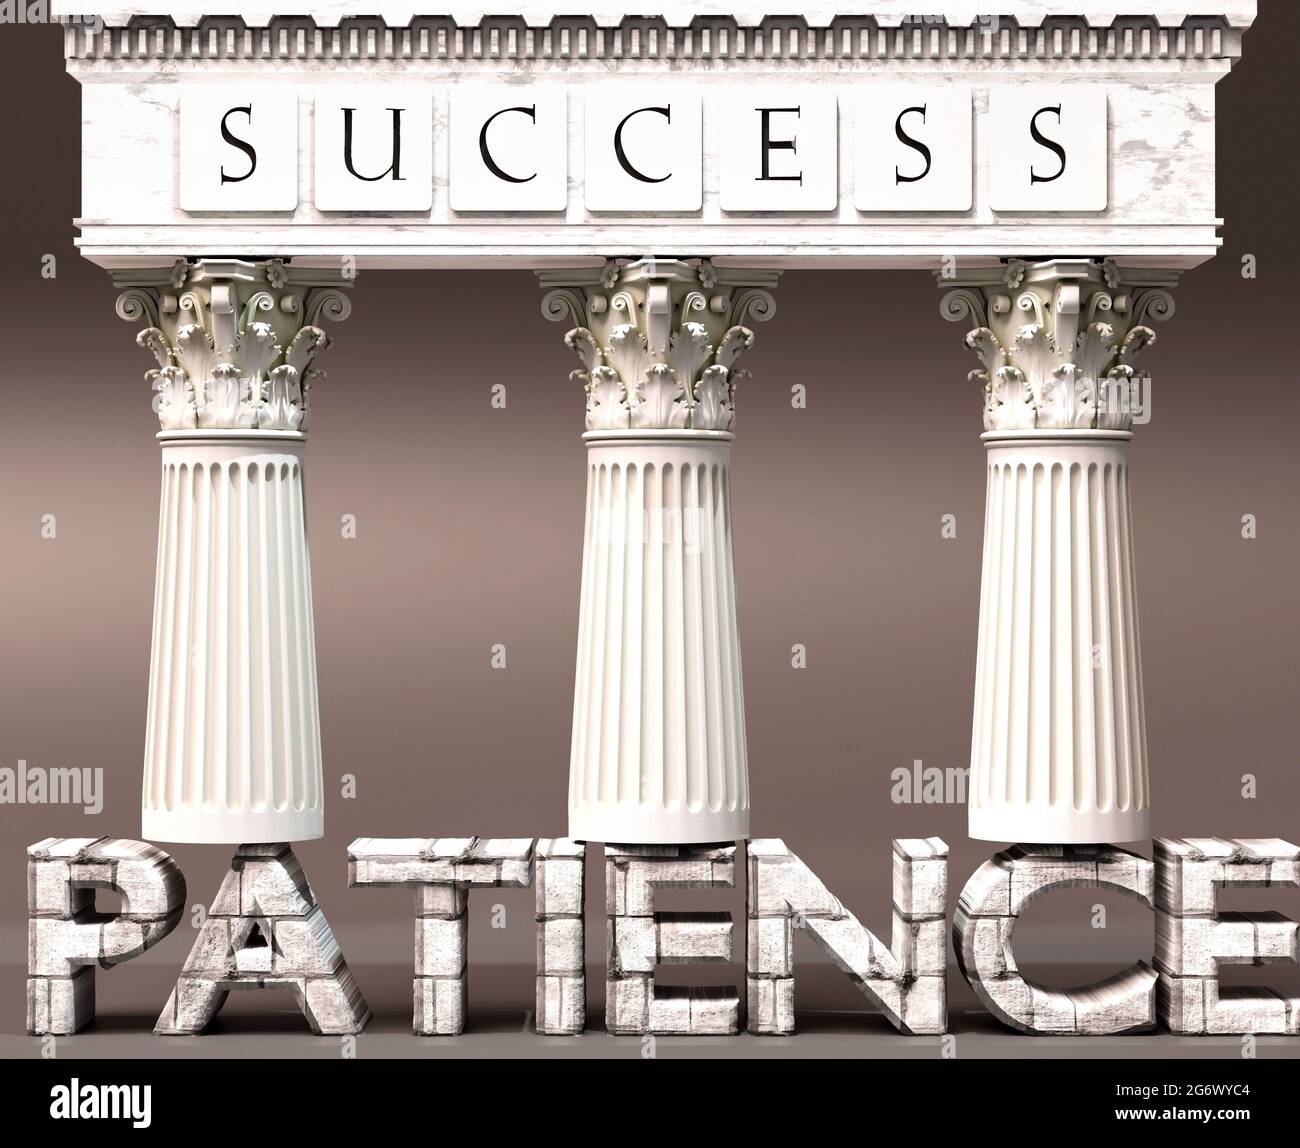 Patience as a foundation of success - symbolized by pillars of success supported by Patience to show that it is essential for reaching goals and achie Stock Photo